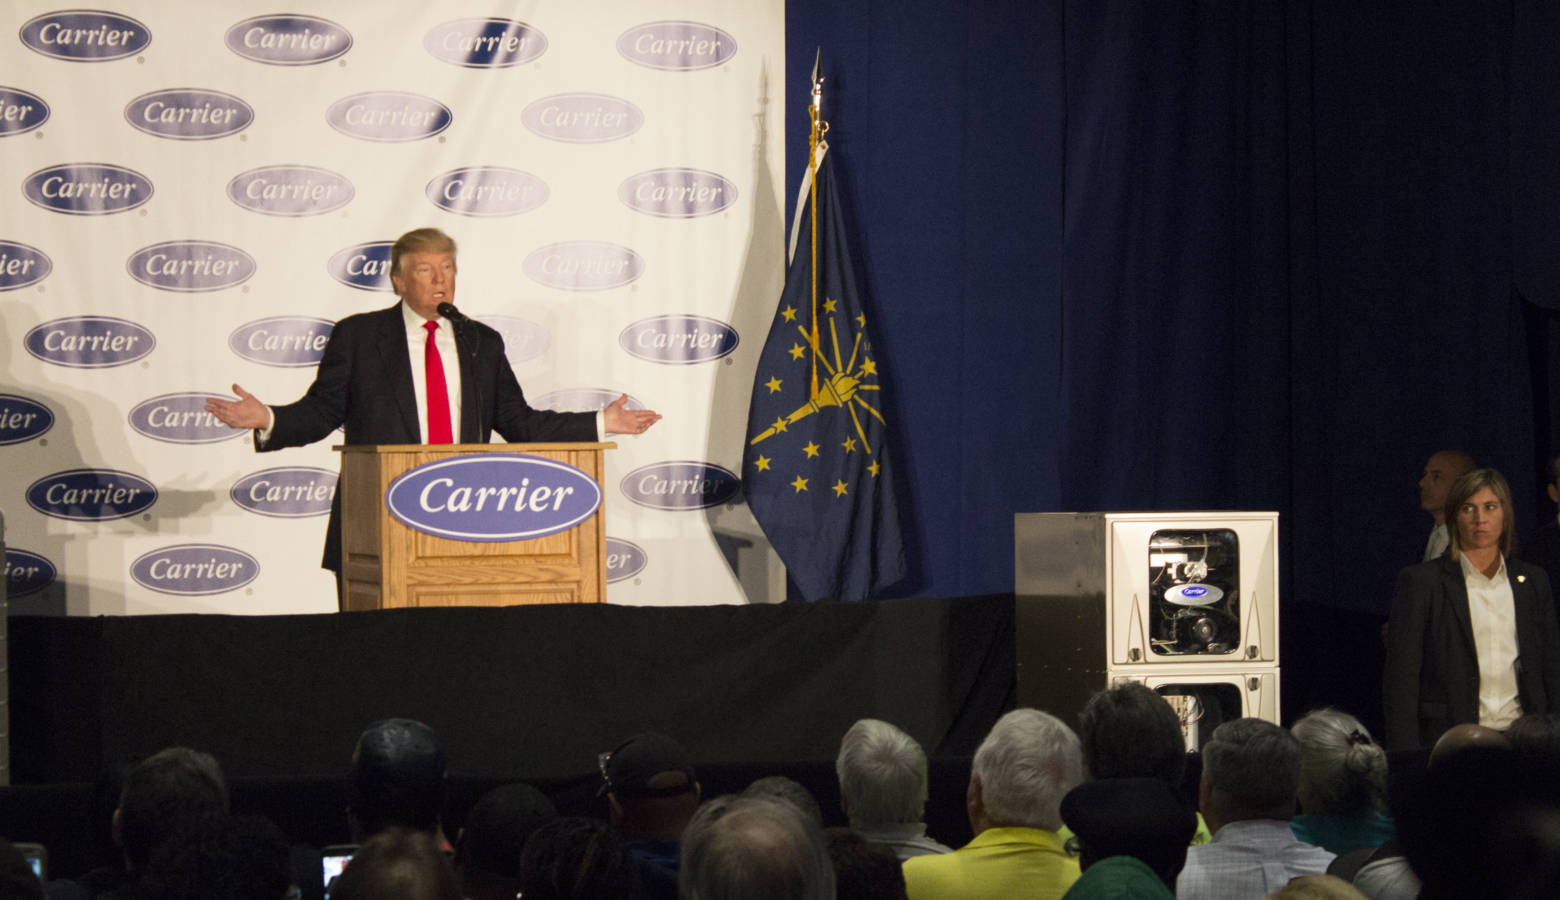 Then-President-elect Donald Trump addresses workers at the Indianapolis Carrier factory last December. (Drew Daudelin/WFYI)